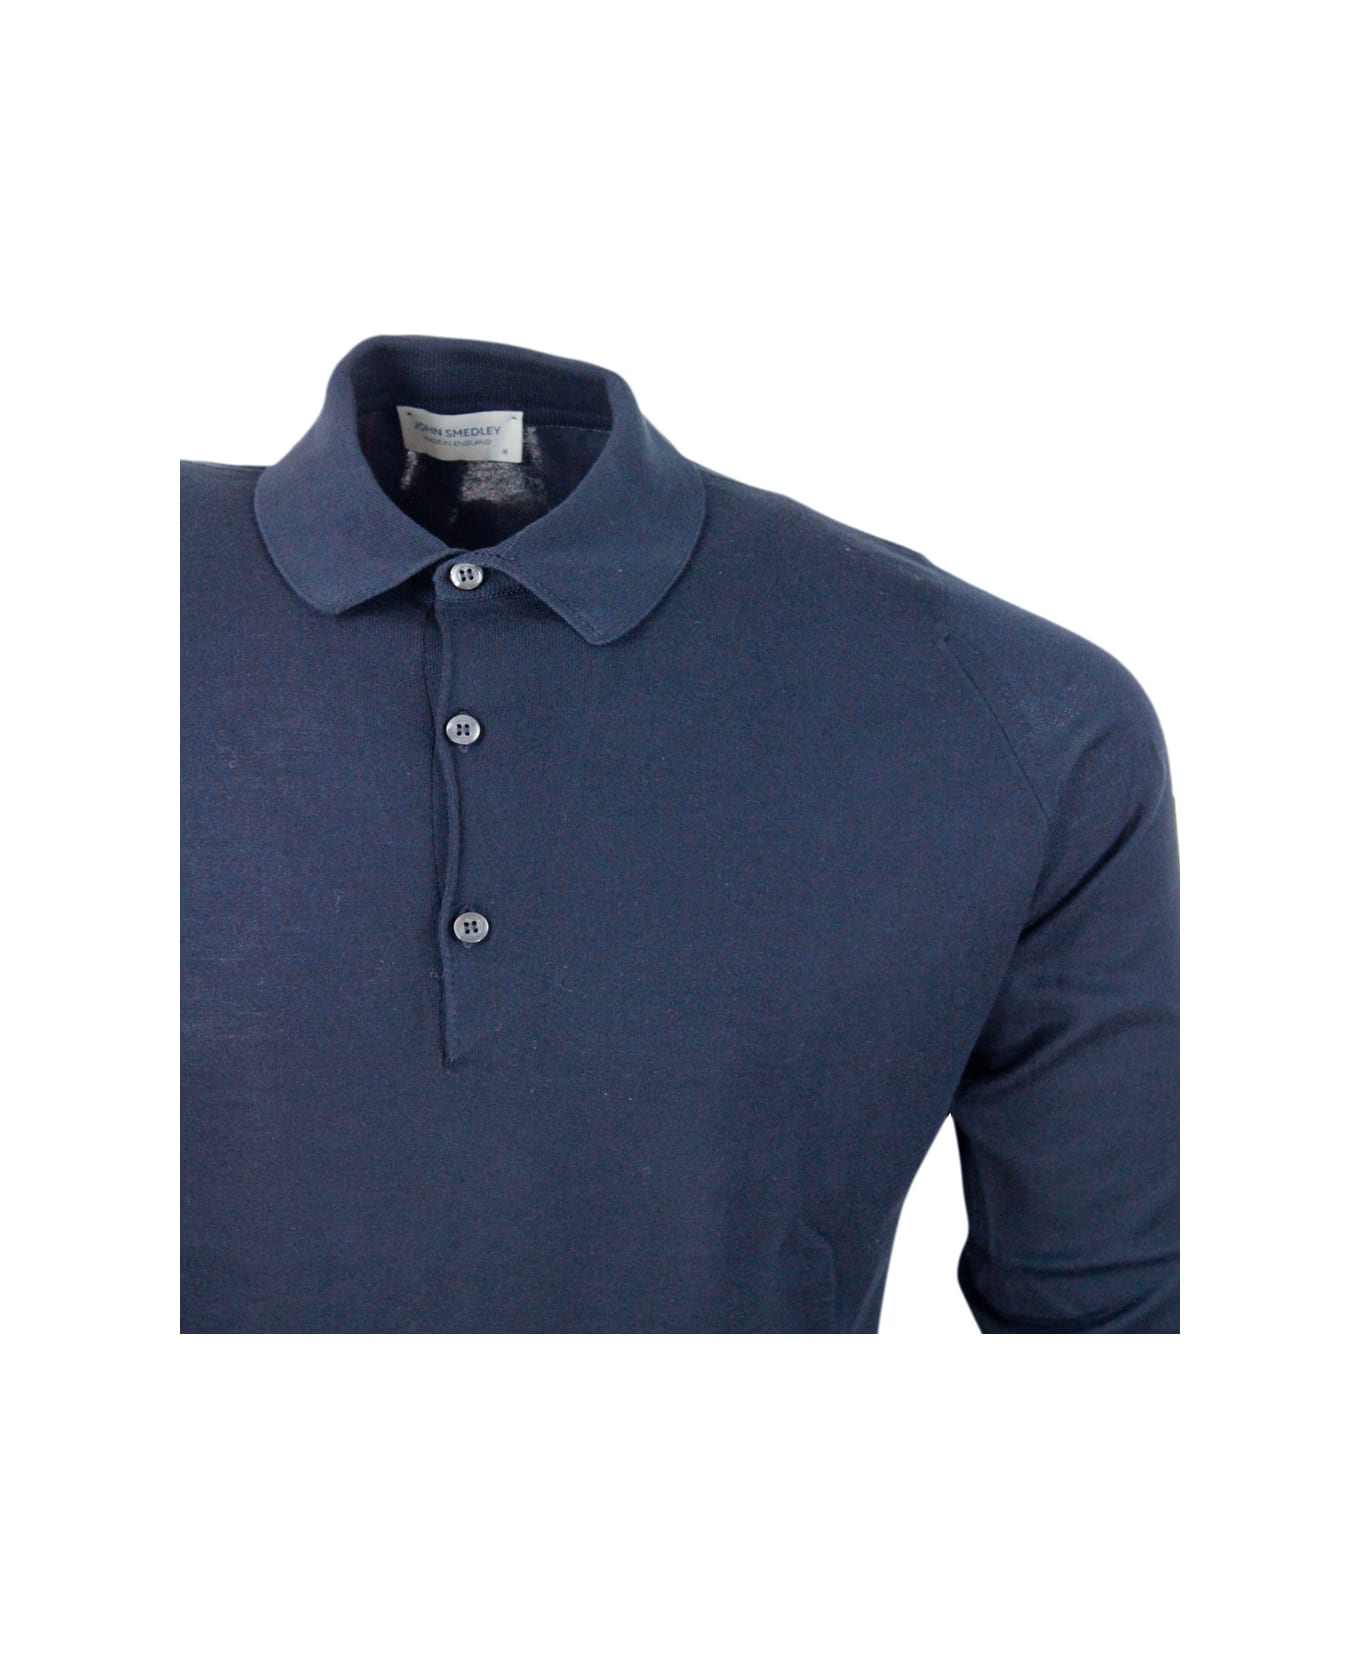 John Smedley Long-sleeved Polo Shirt In Extrafine Cotton Thread With Three Buttons - Blu